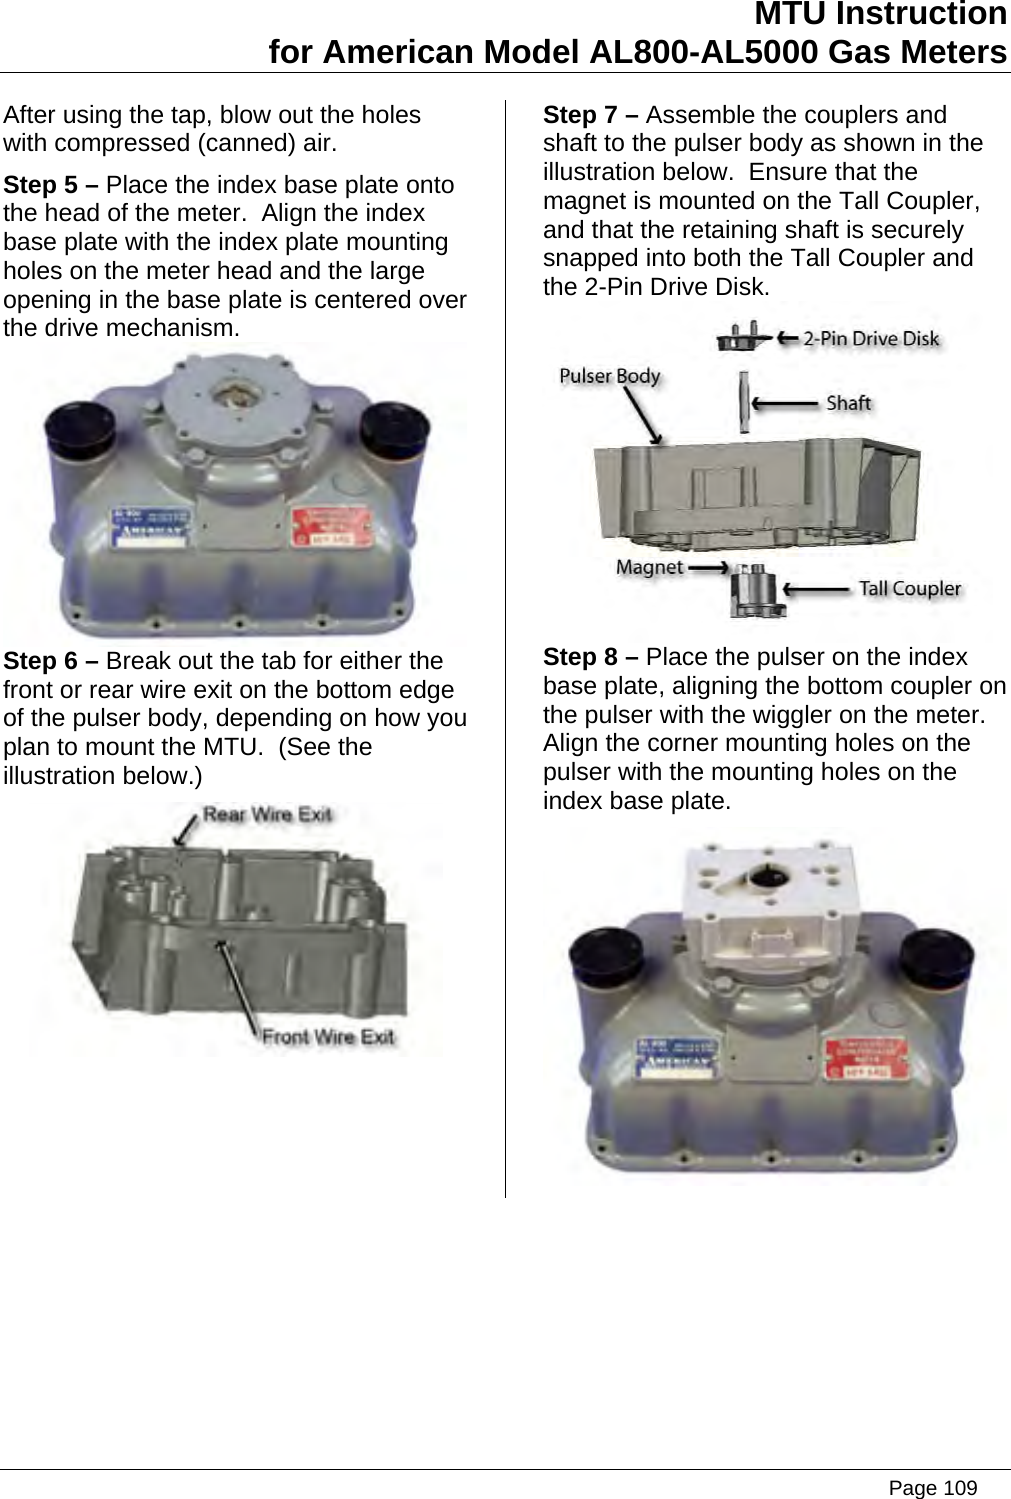 MTU Instruction for American Model AL800-AL5000 Gas Meters After using the tap, blow out the holes with compressed (canned) air. Step 5 – Place the index base plate onto the head of the meter.  Align the index base plate with the index plate mounting holes on the meter head and the large opening in the base plate is centered over the drive mechanism.  Step 6 – Break out the tab for either the front or rear wire exit on the bottom edge of the pulser body, depending on how you plan to mount the MTU.  (See the illustration below.)  Step 7 – Assemble the couplers and shaft to the pulser body as shown in the illustration below.  Ensure that the magnet is mounted on the Tall Coupler, and that the retaining shaft is securely snapped into both the Tall Coupler and the 2-Pin Drive Disk.  Step 8 – Place the pulser on the index base plate, aligning the bottom coupler on the pulser with the wiggler on the meter.  Align the corner mounting holes on the pulser with the mounting holes on the index base plate.    Page 109